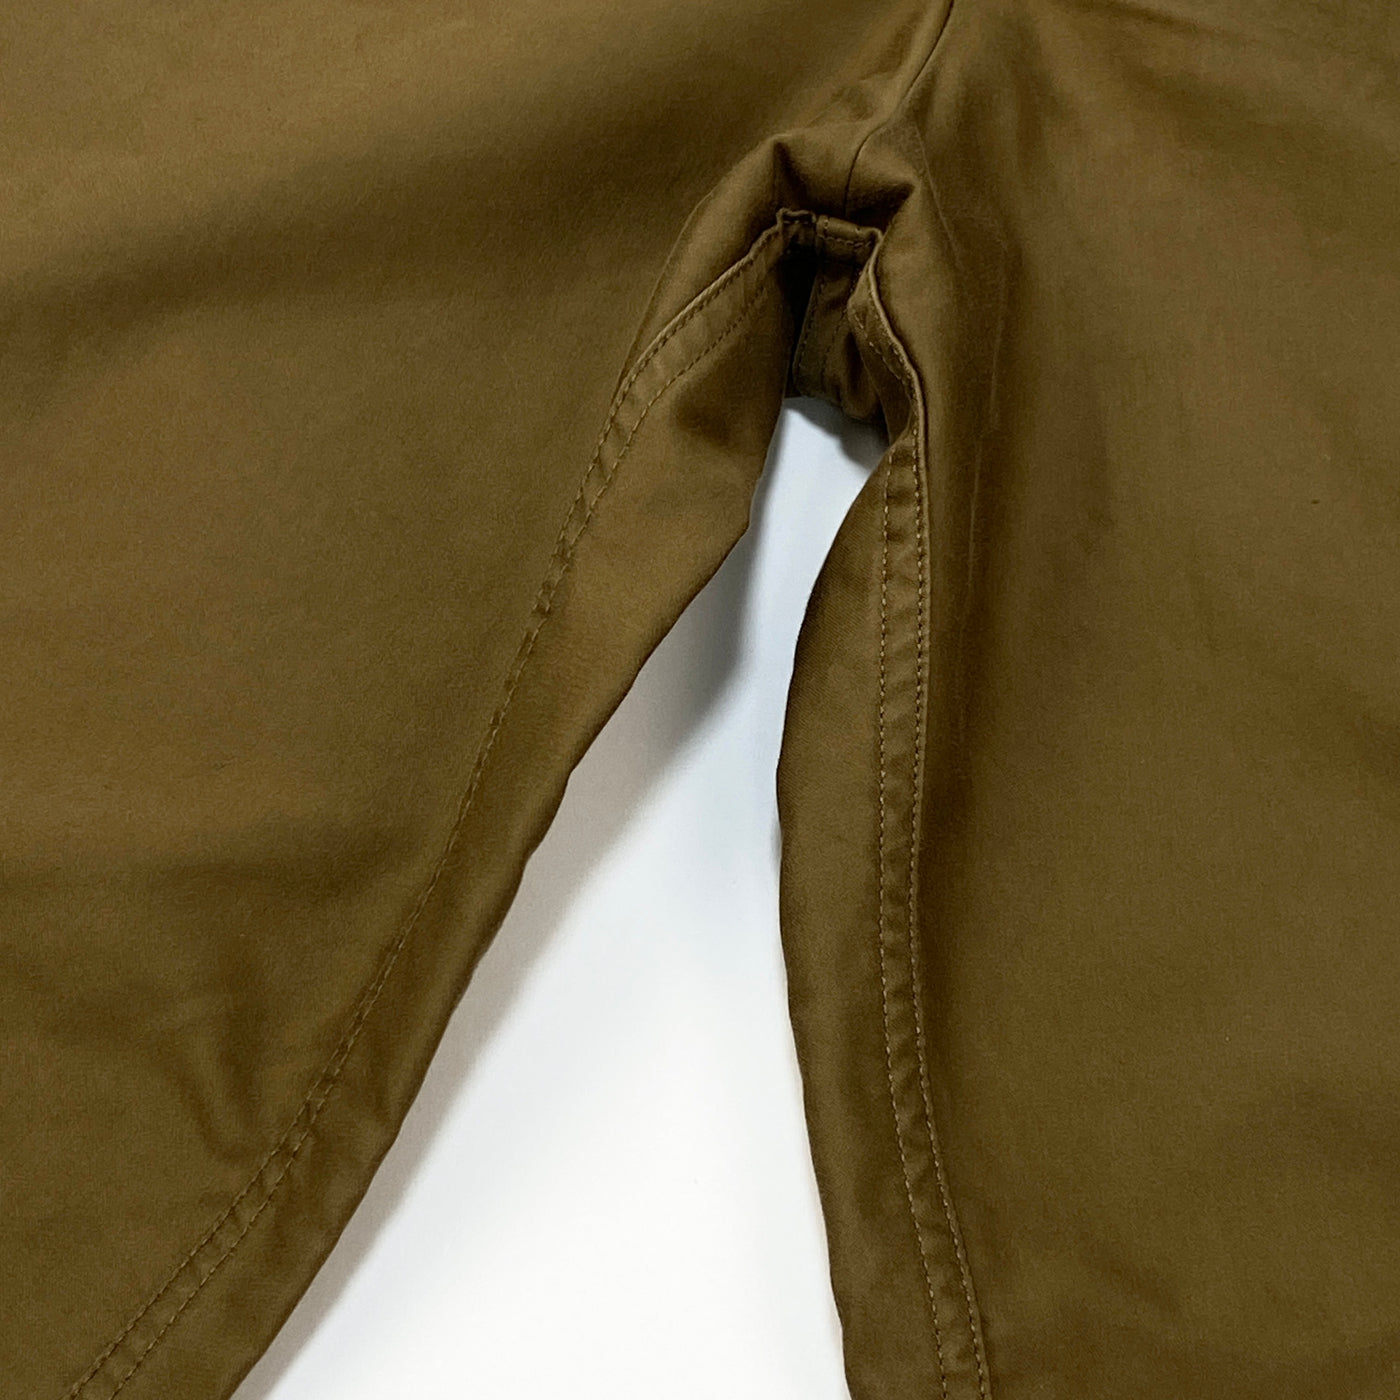 2020AW WIDE CHINOS BROWN CES18PT16 L